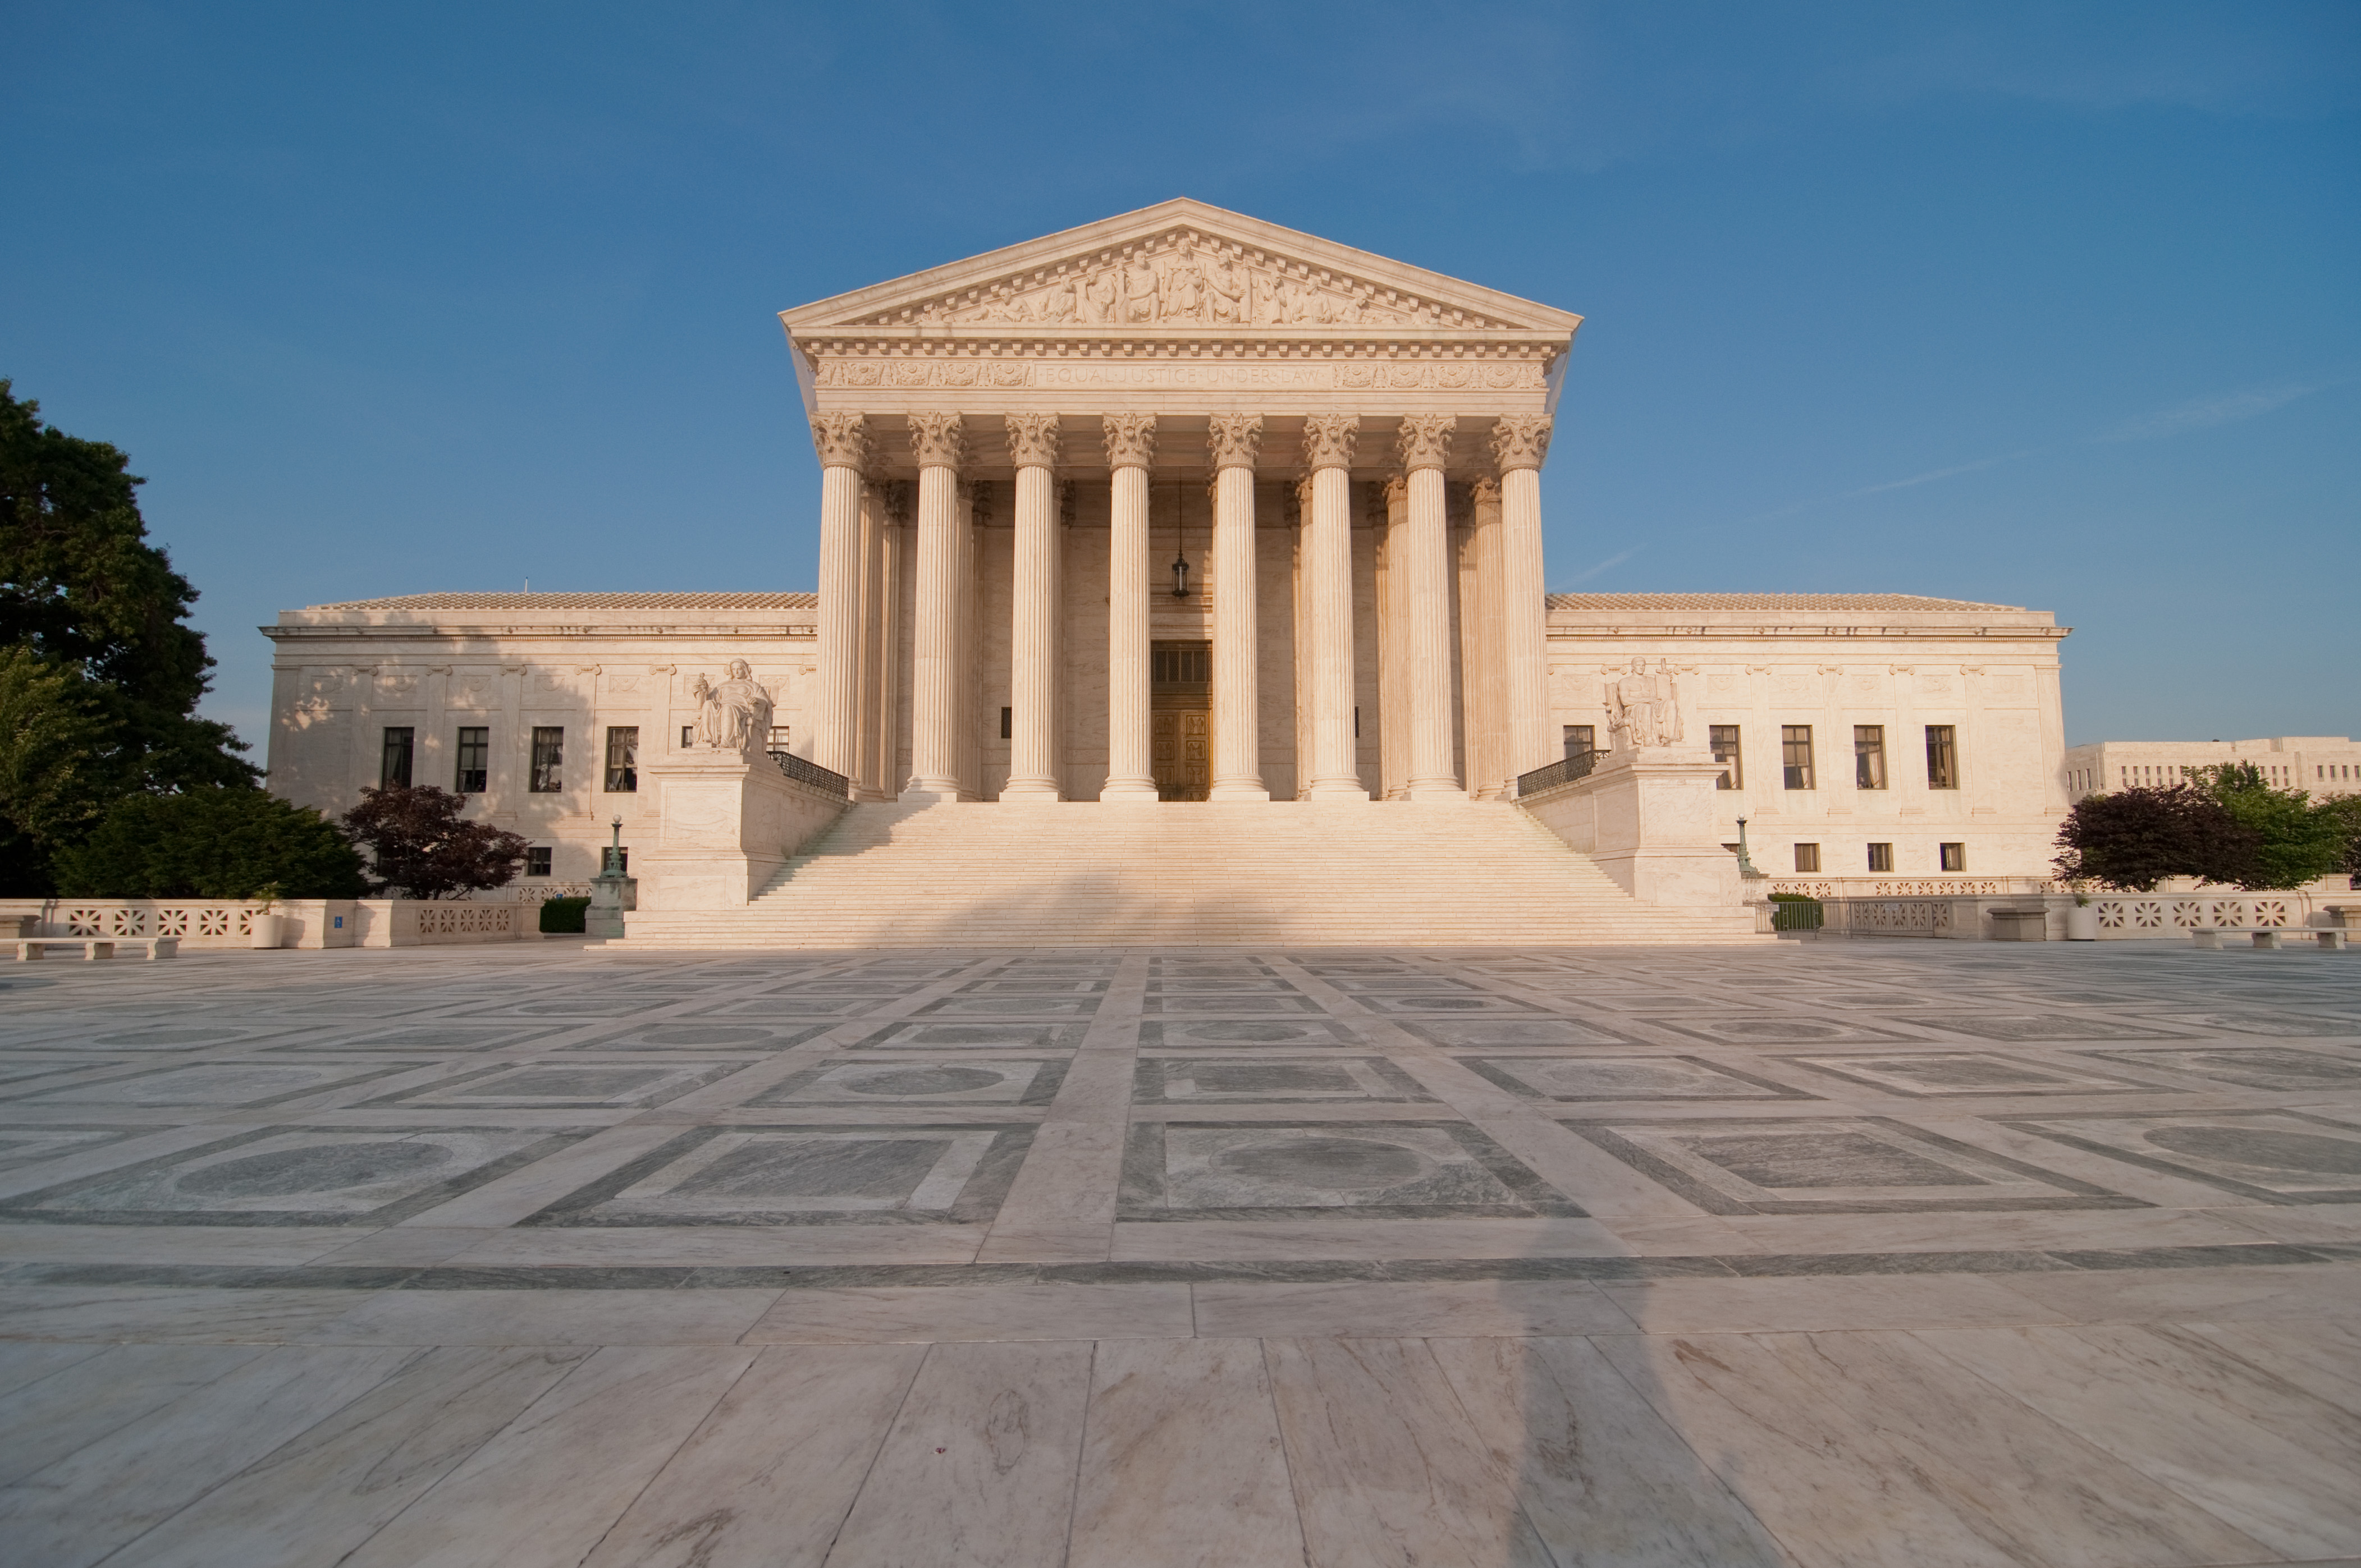 Image of the Supreme Court